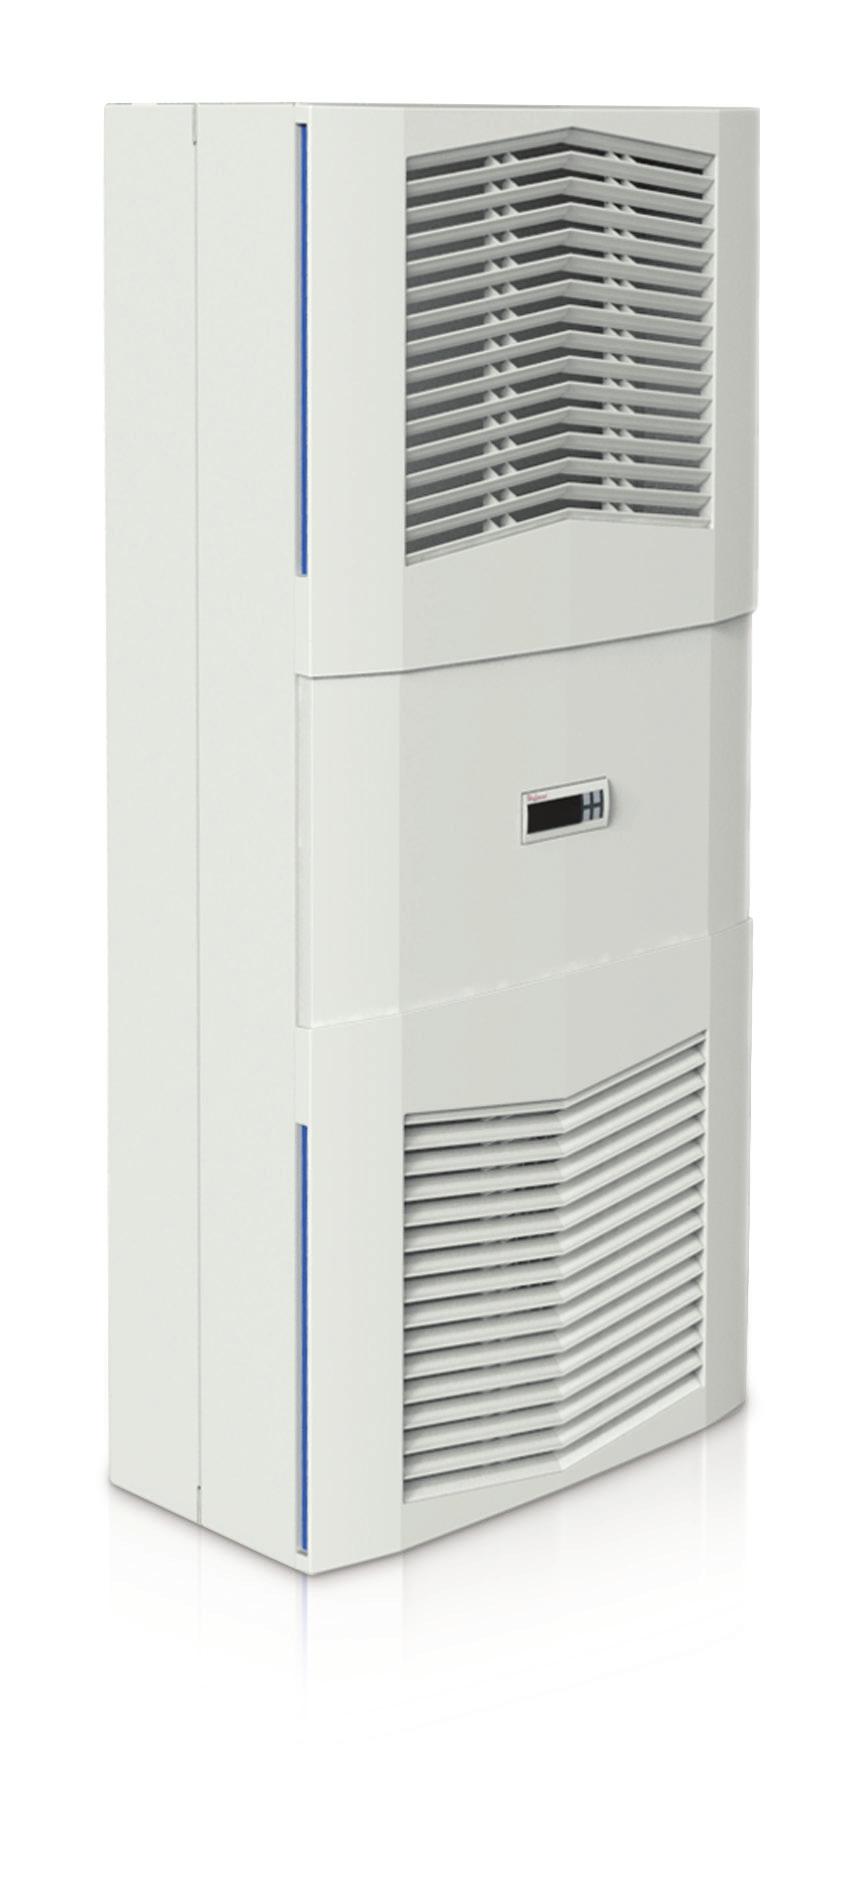 The Ultimate in Cooling Convenience Specially designed and developed to meet the requirements of worldwide industrial customers, nvent HOFFMAN s SpectraCool Slim Fit air conditioners are easy to